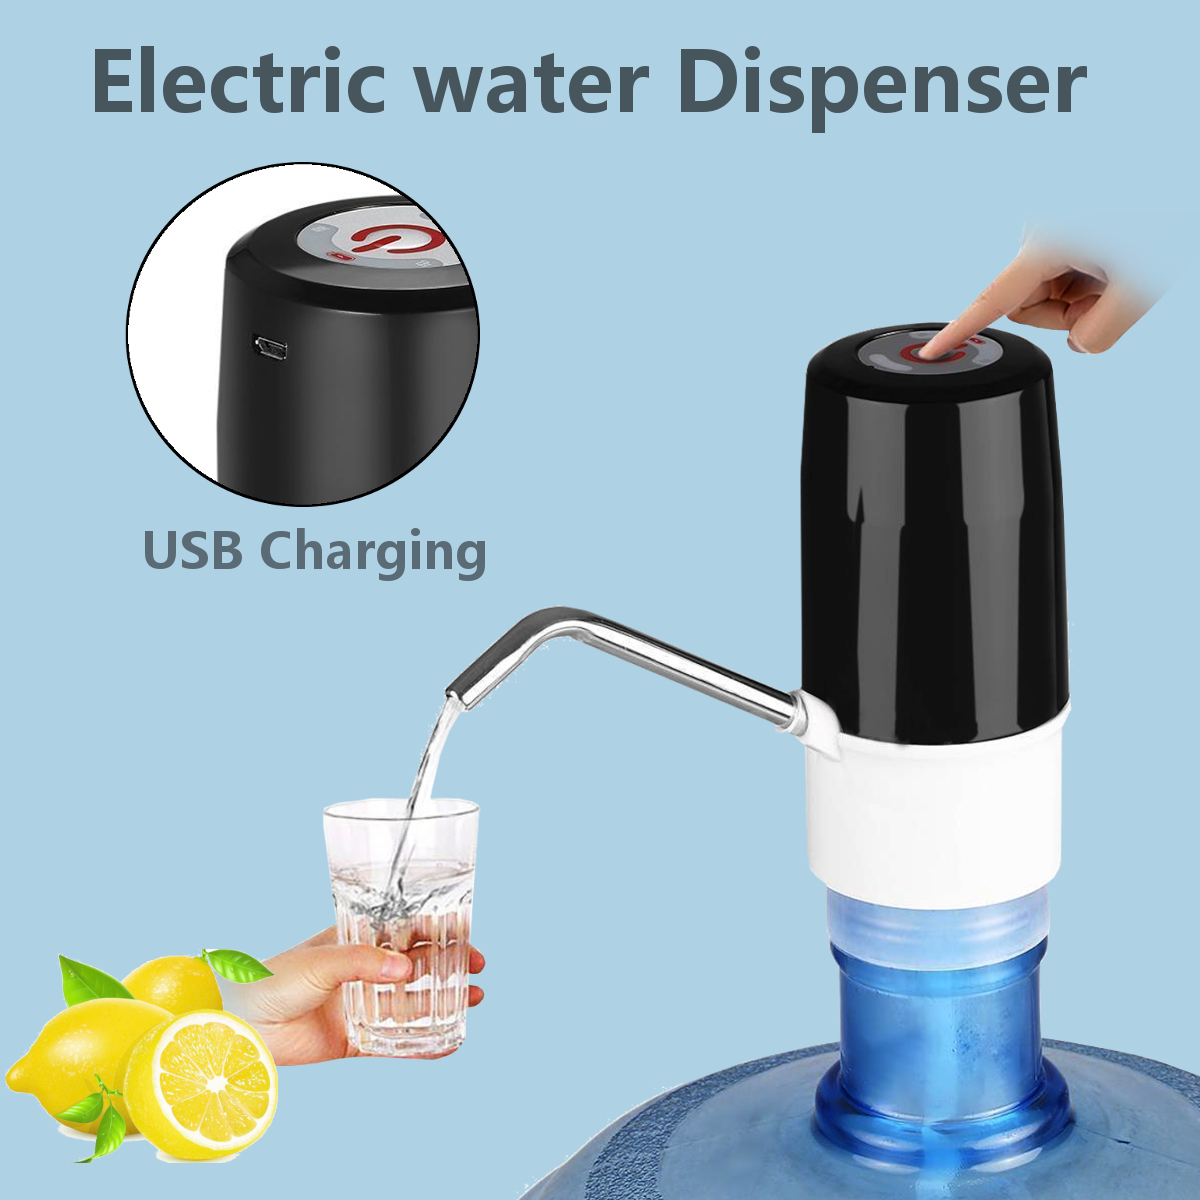 USB-Rechargeable-Electric-Water-Dispenser-Universal-Drinking-Water-Pump-Portable-Water-Bottle-Pump-1384875-4